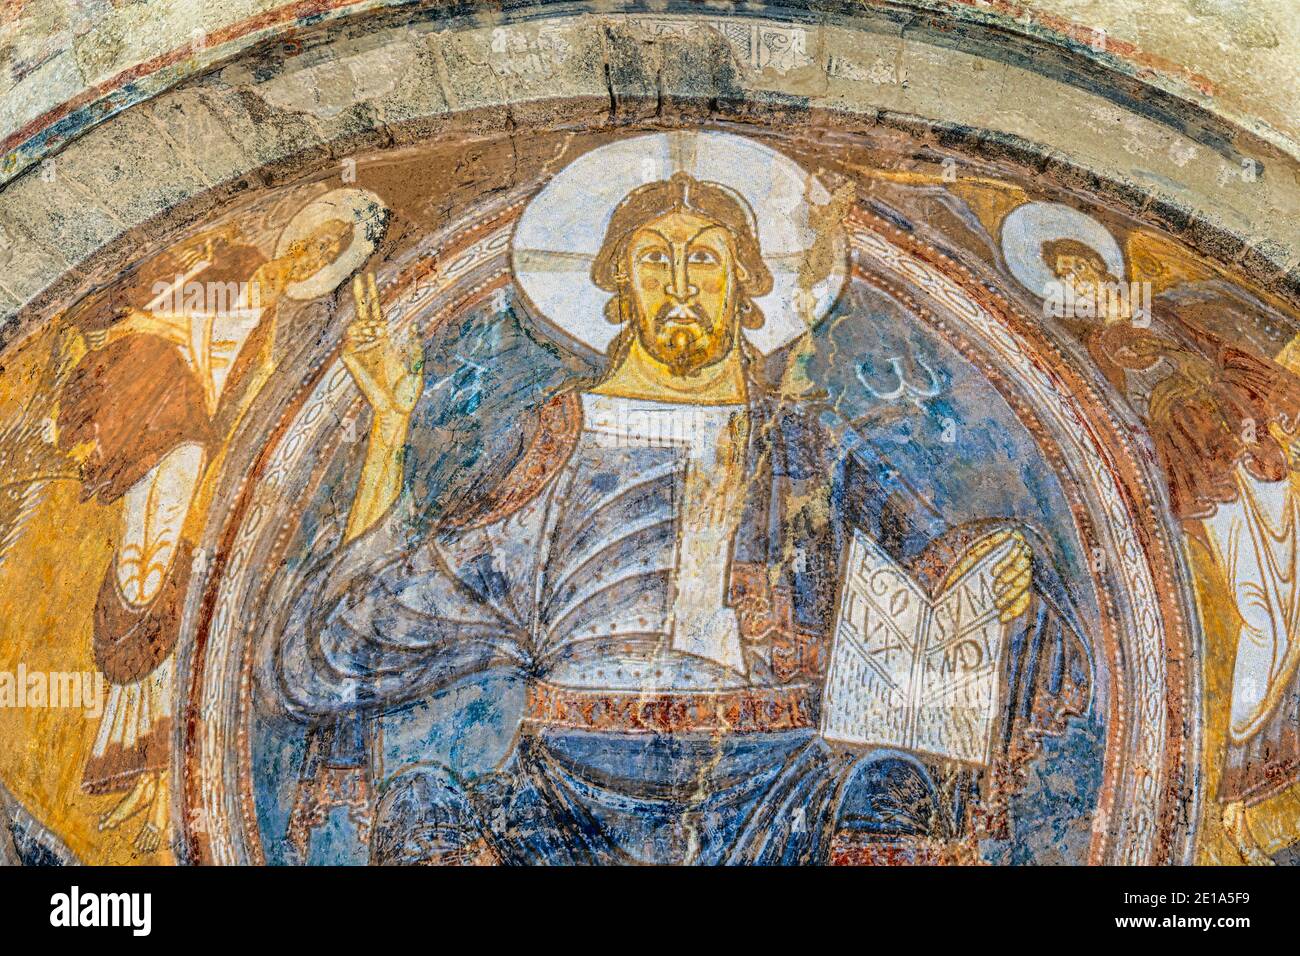 Interior of Romanesque church of Sant Climent, consecrated in 1123.  Christ Pantocrator above the chancel area.  Taüll, Lleida Province, Catalonia, Sp Stock Photo